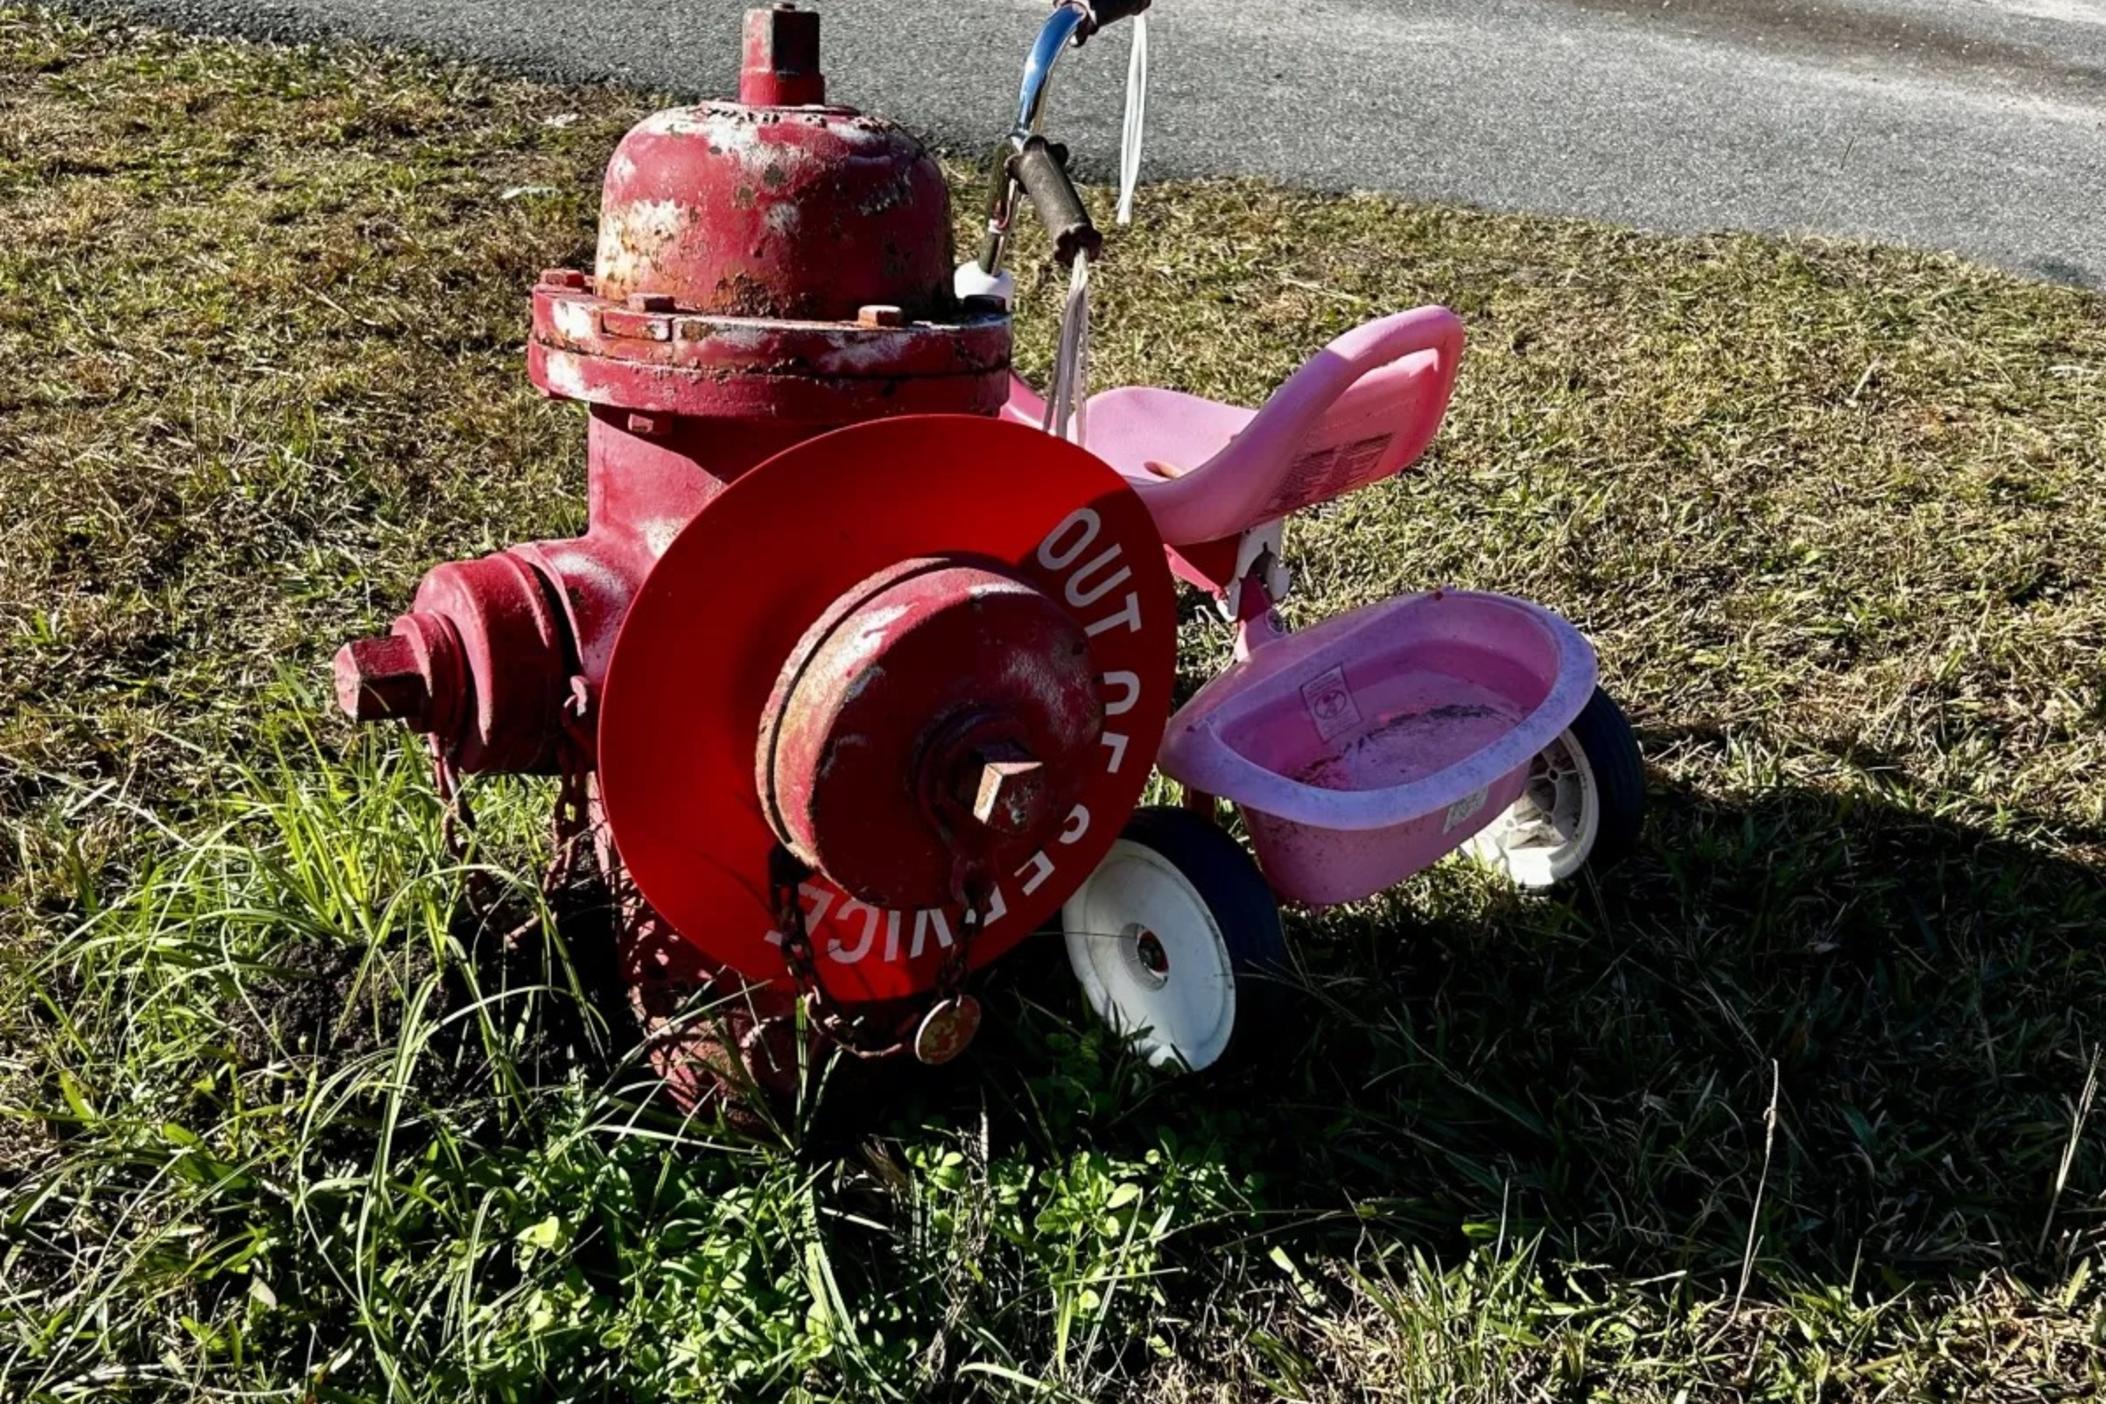 Cypress Bend Mobile Home Park labeled its two non-working fire hydrants. Credit: Robin Kemp/The Current GA